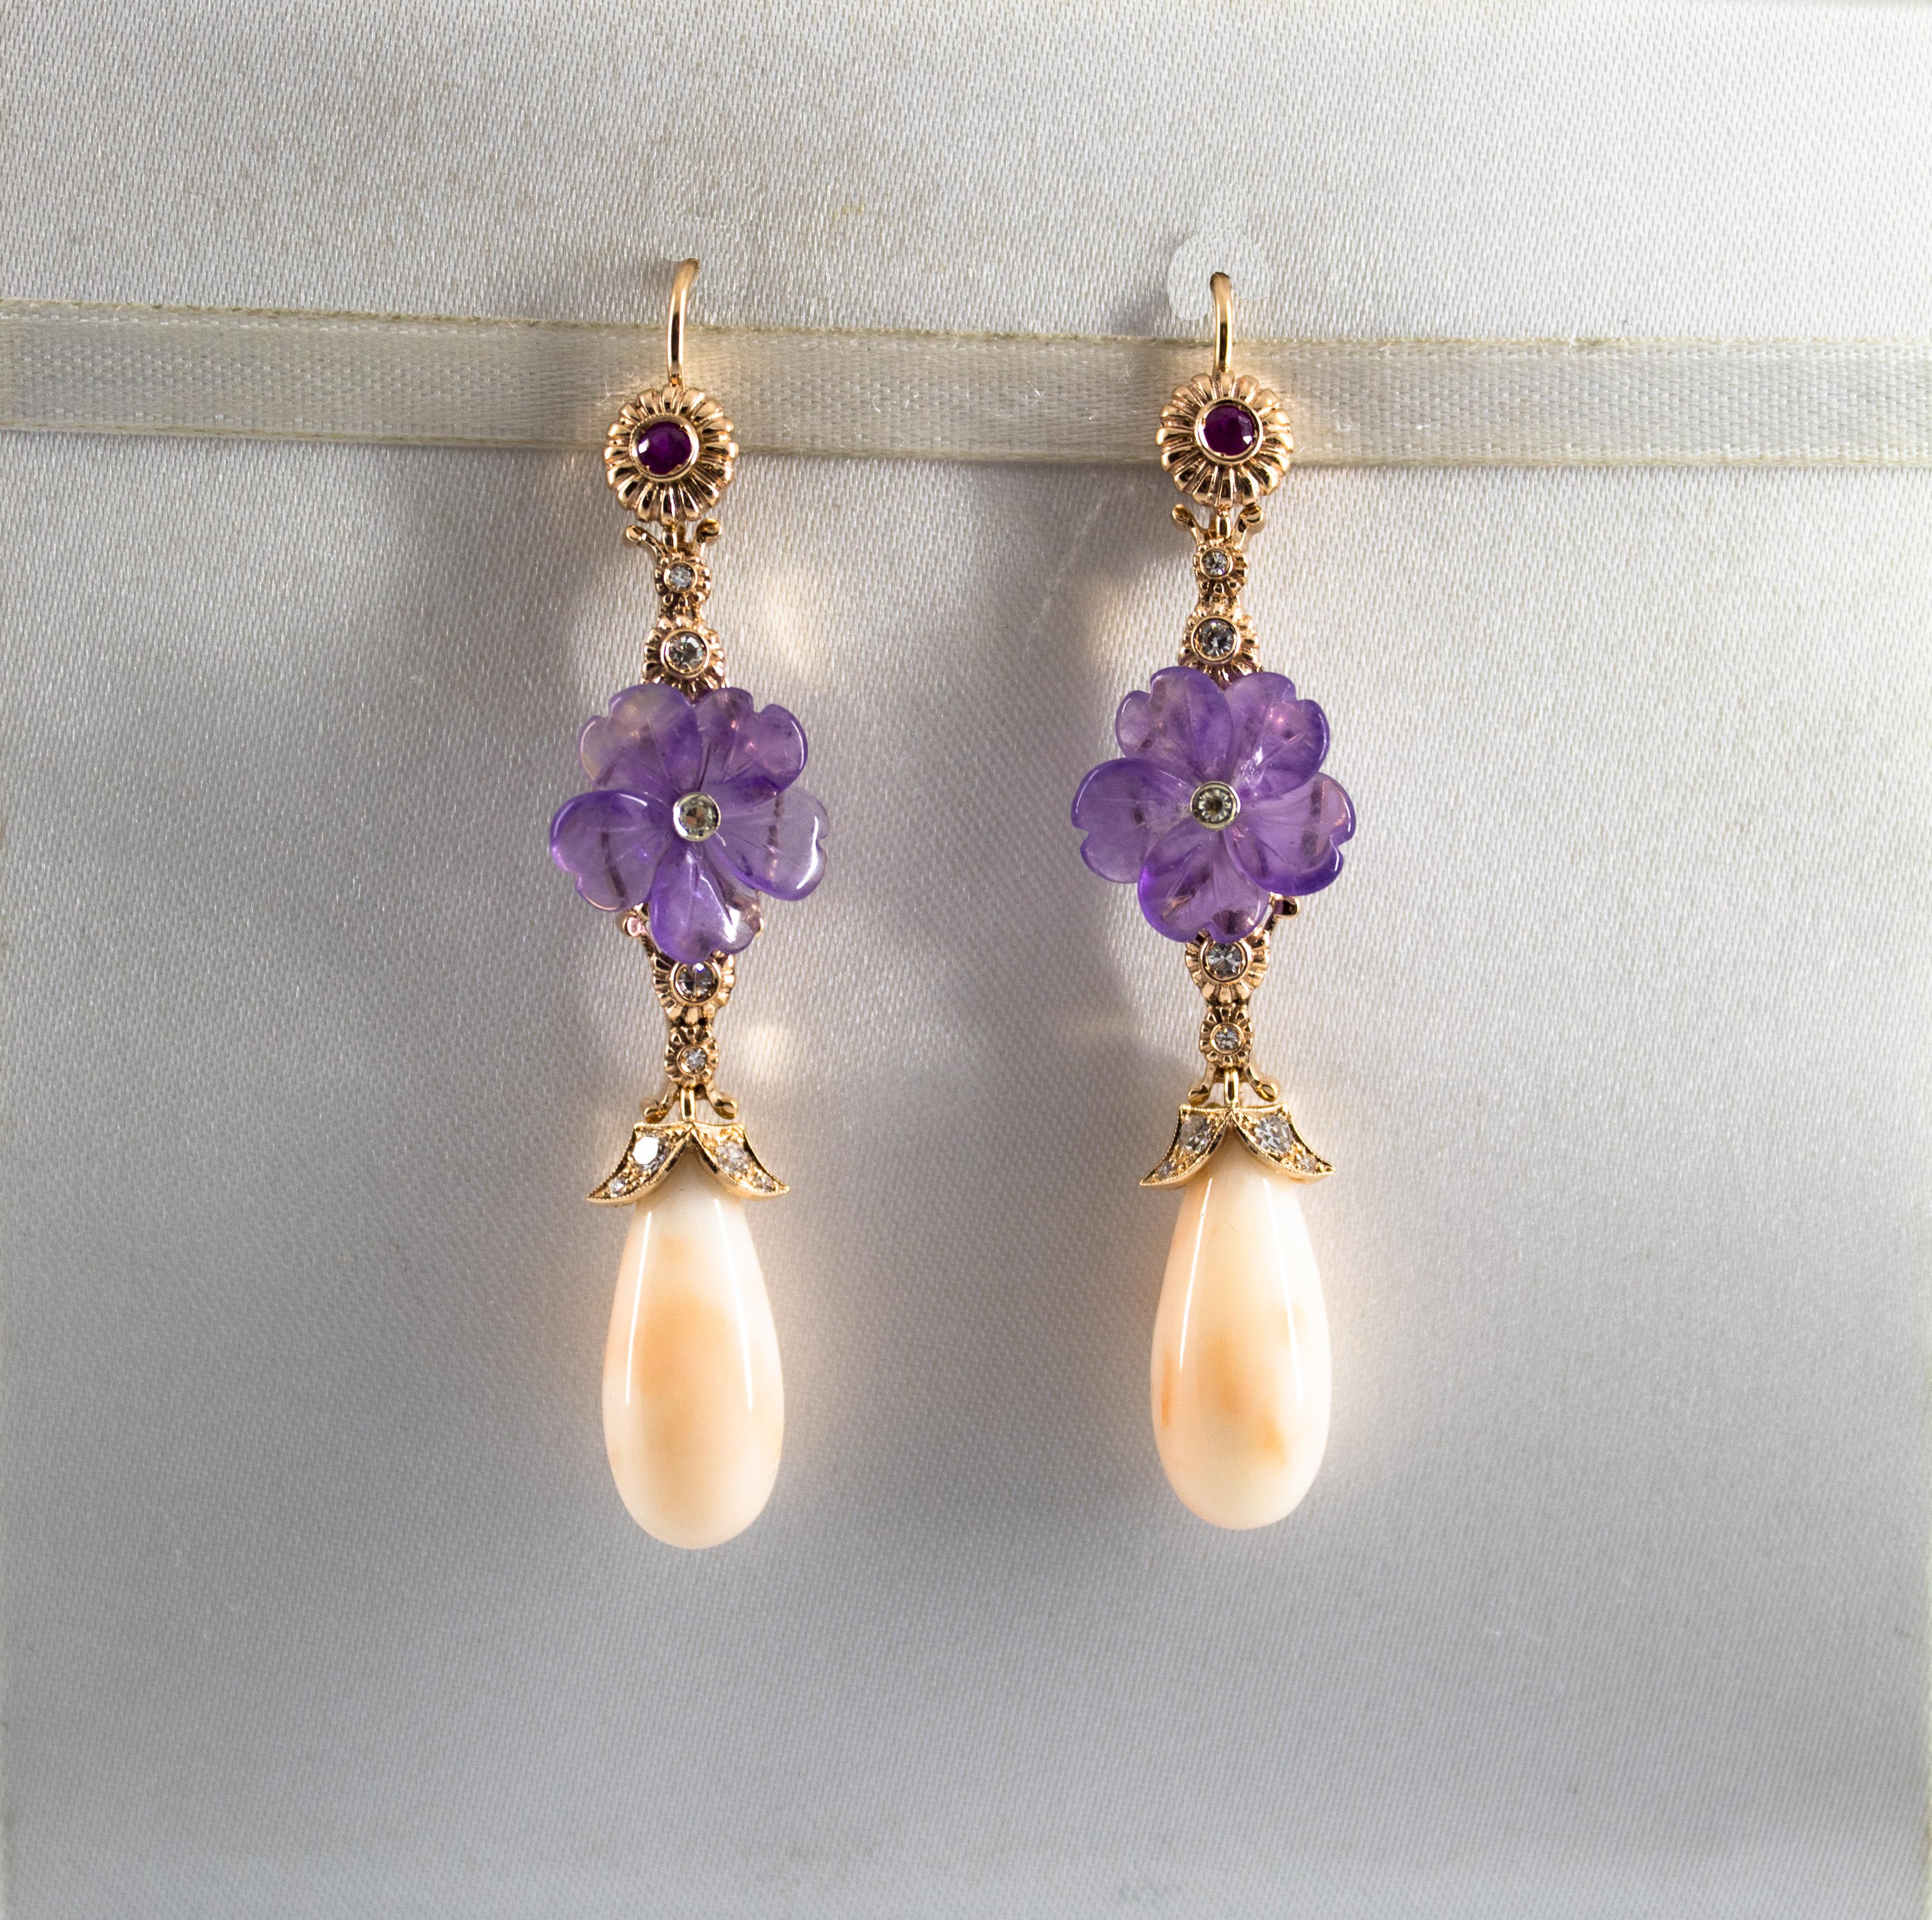 These Stud Earrings are made of 14K Yellow Gold.
These Earrings have 0.35 Carats of White Diamonds.
These Earrings have 0.10 Carats of Rubies.
These Earrings have also Pink Coral and Amethyst.
All our Earrings have pins for pierced ears but we can